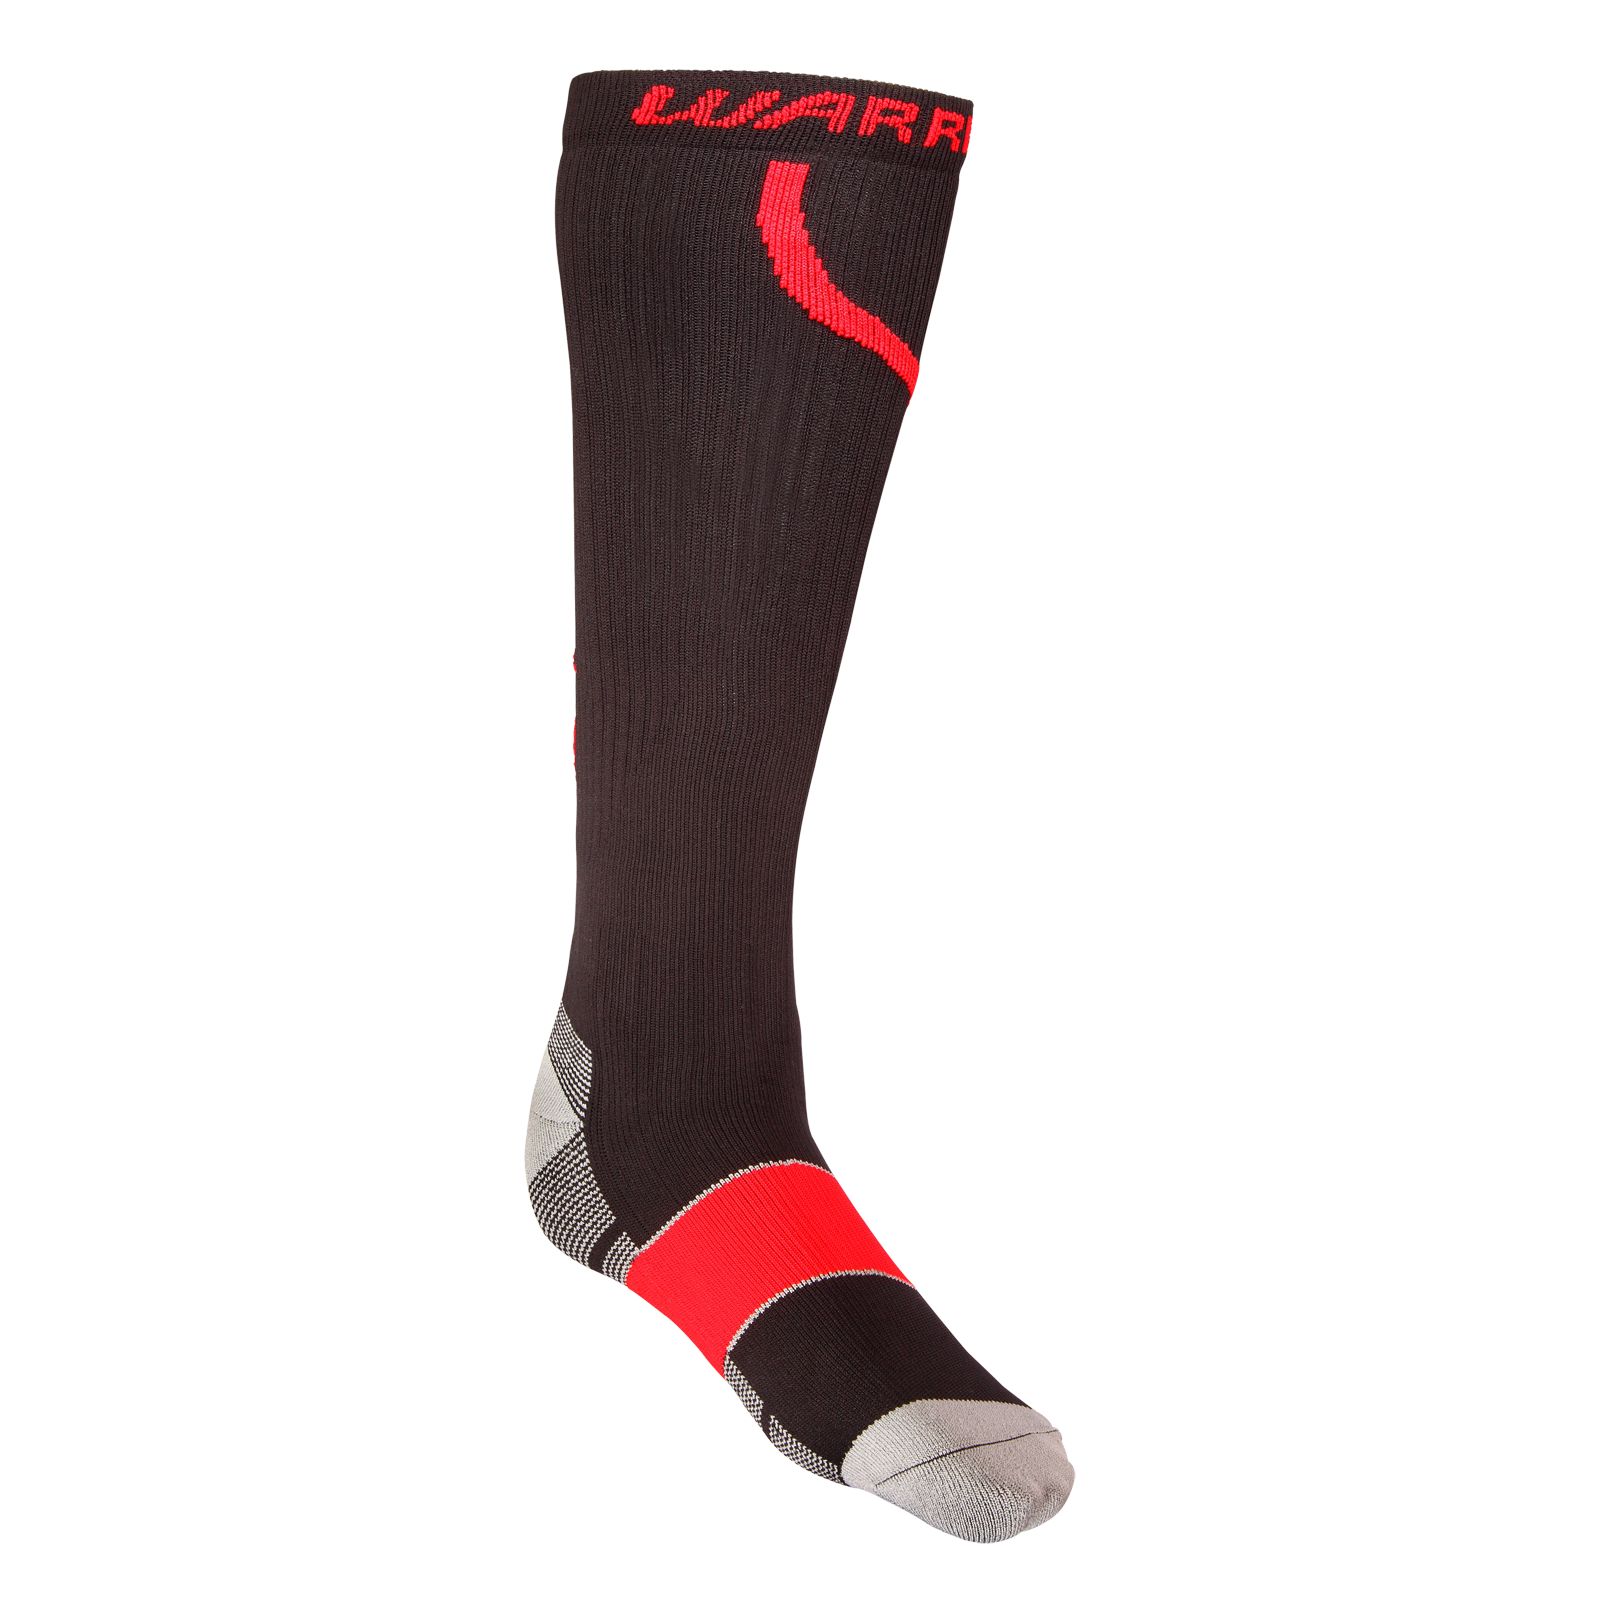 Comp Pro Hockey Sock, Black with Red image number 0